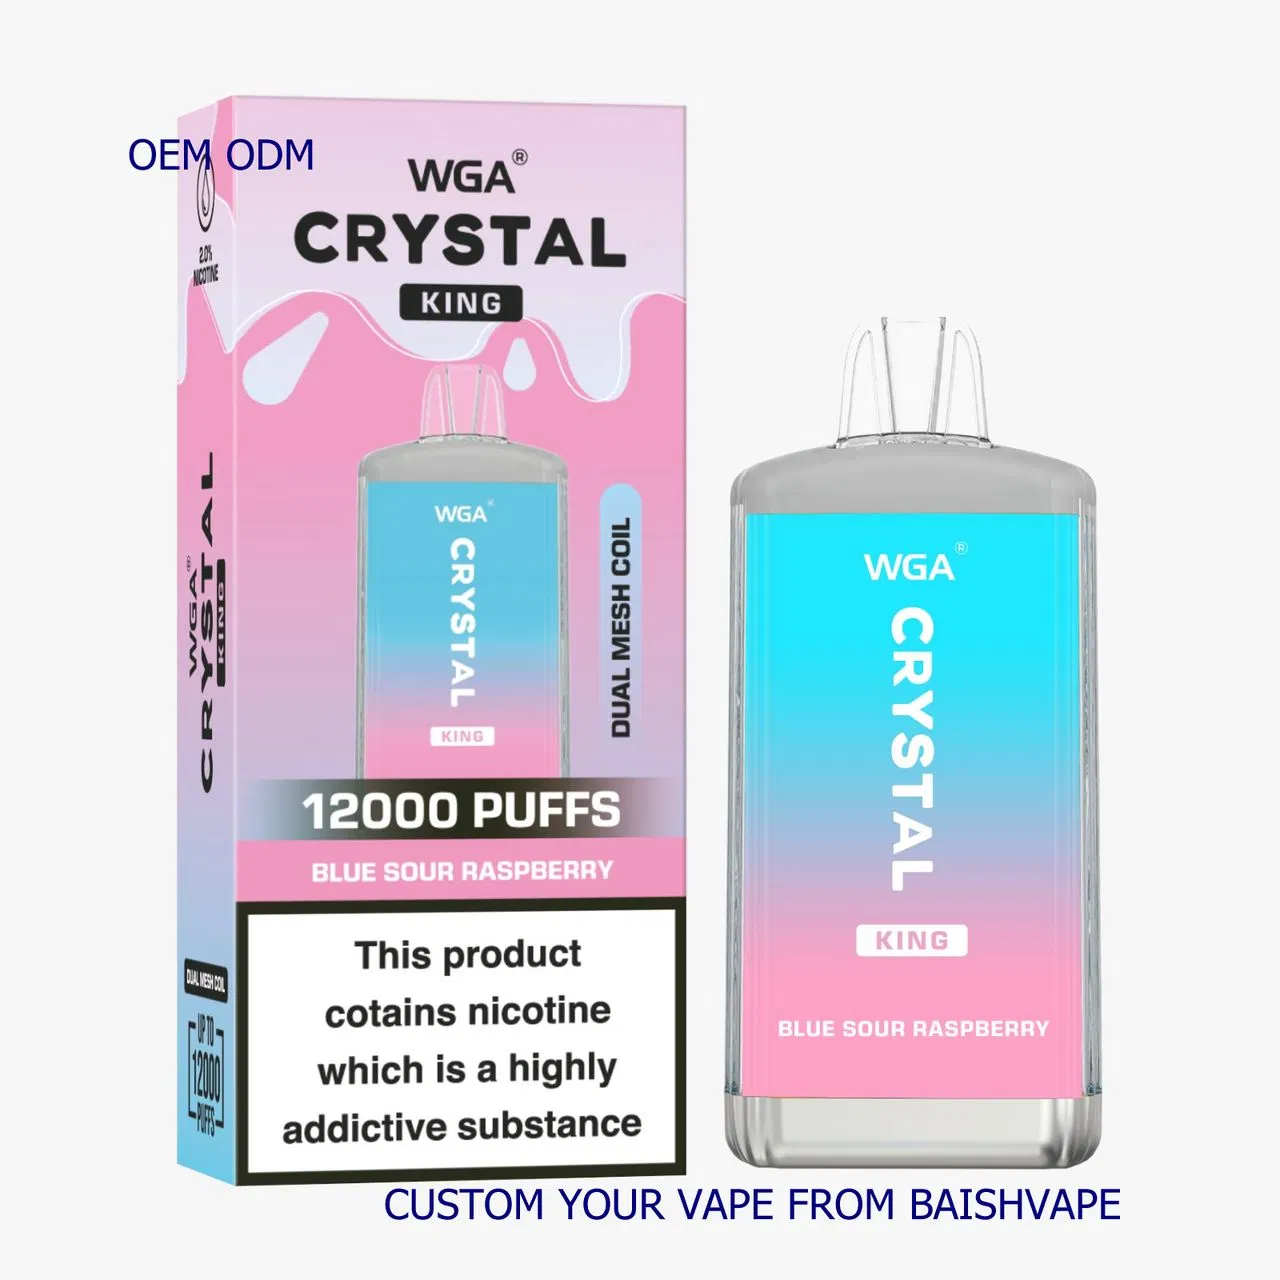 Wga Crystal King 12000 Puff Zbood Personalized Nicotine Pouch Ice Peach 6000/7000/7500/8000/9000 Random Wonder G10 Pod Disposable/Chargeable Vape